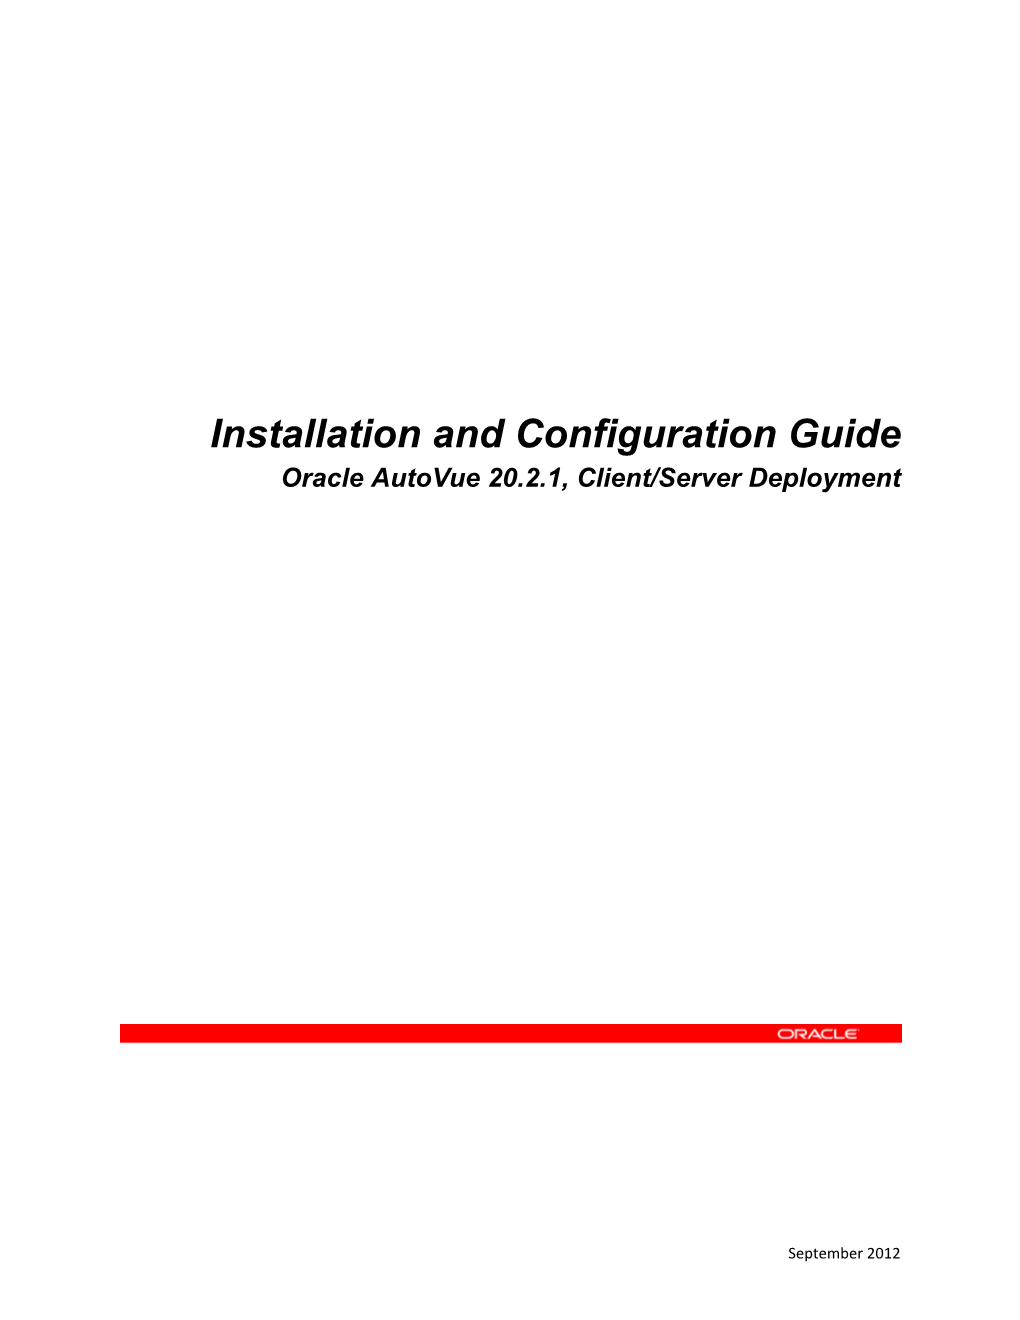 Installation and Configuration Guide Oracle Autovue 20.2.1, Client/Server Deployment